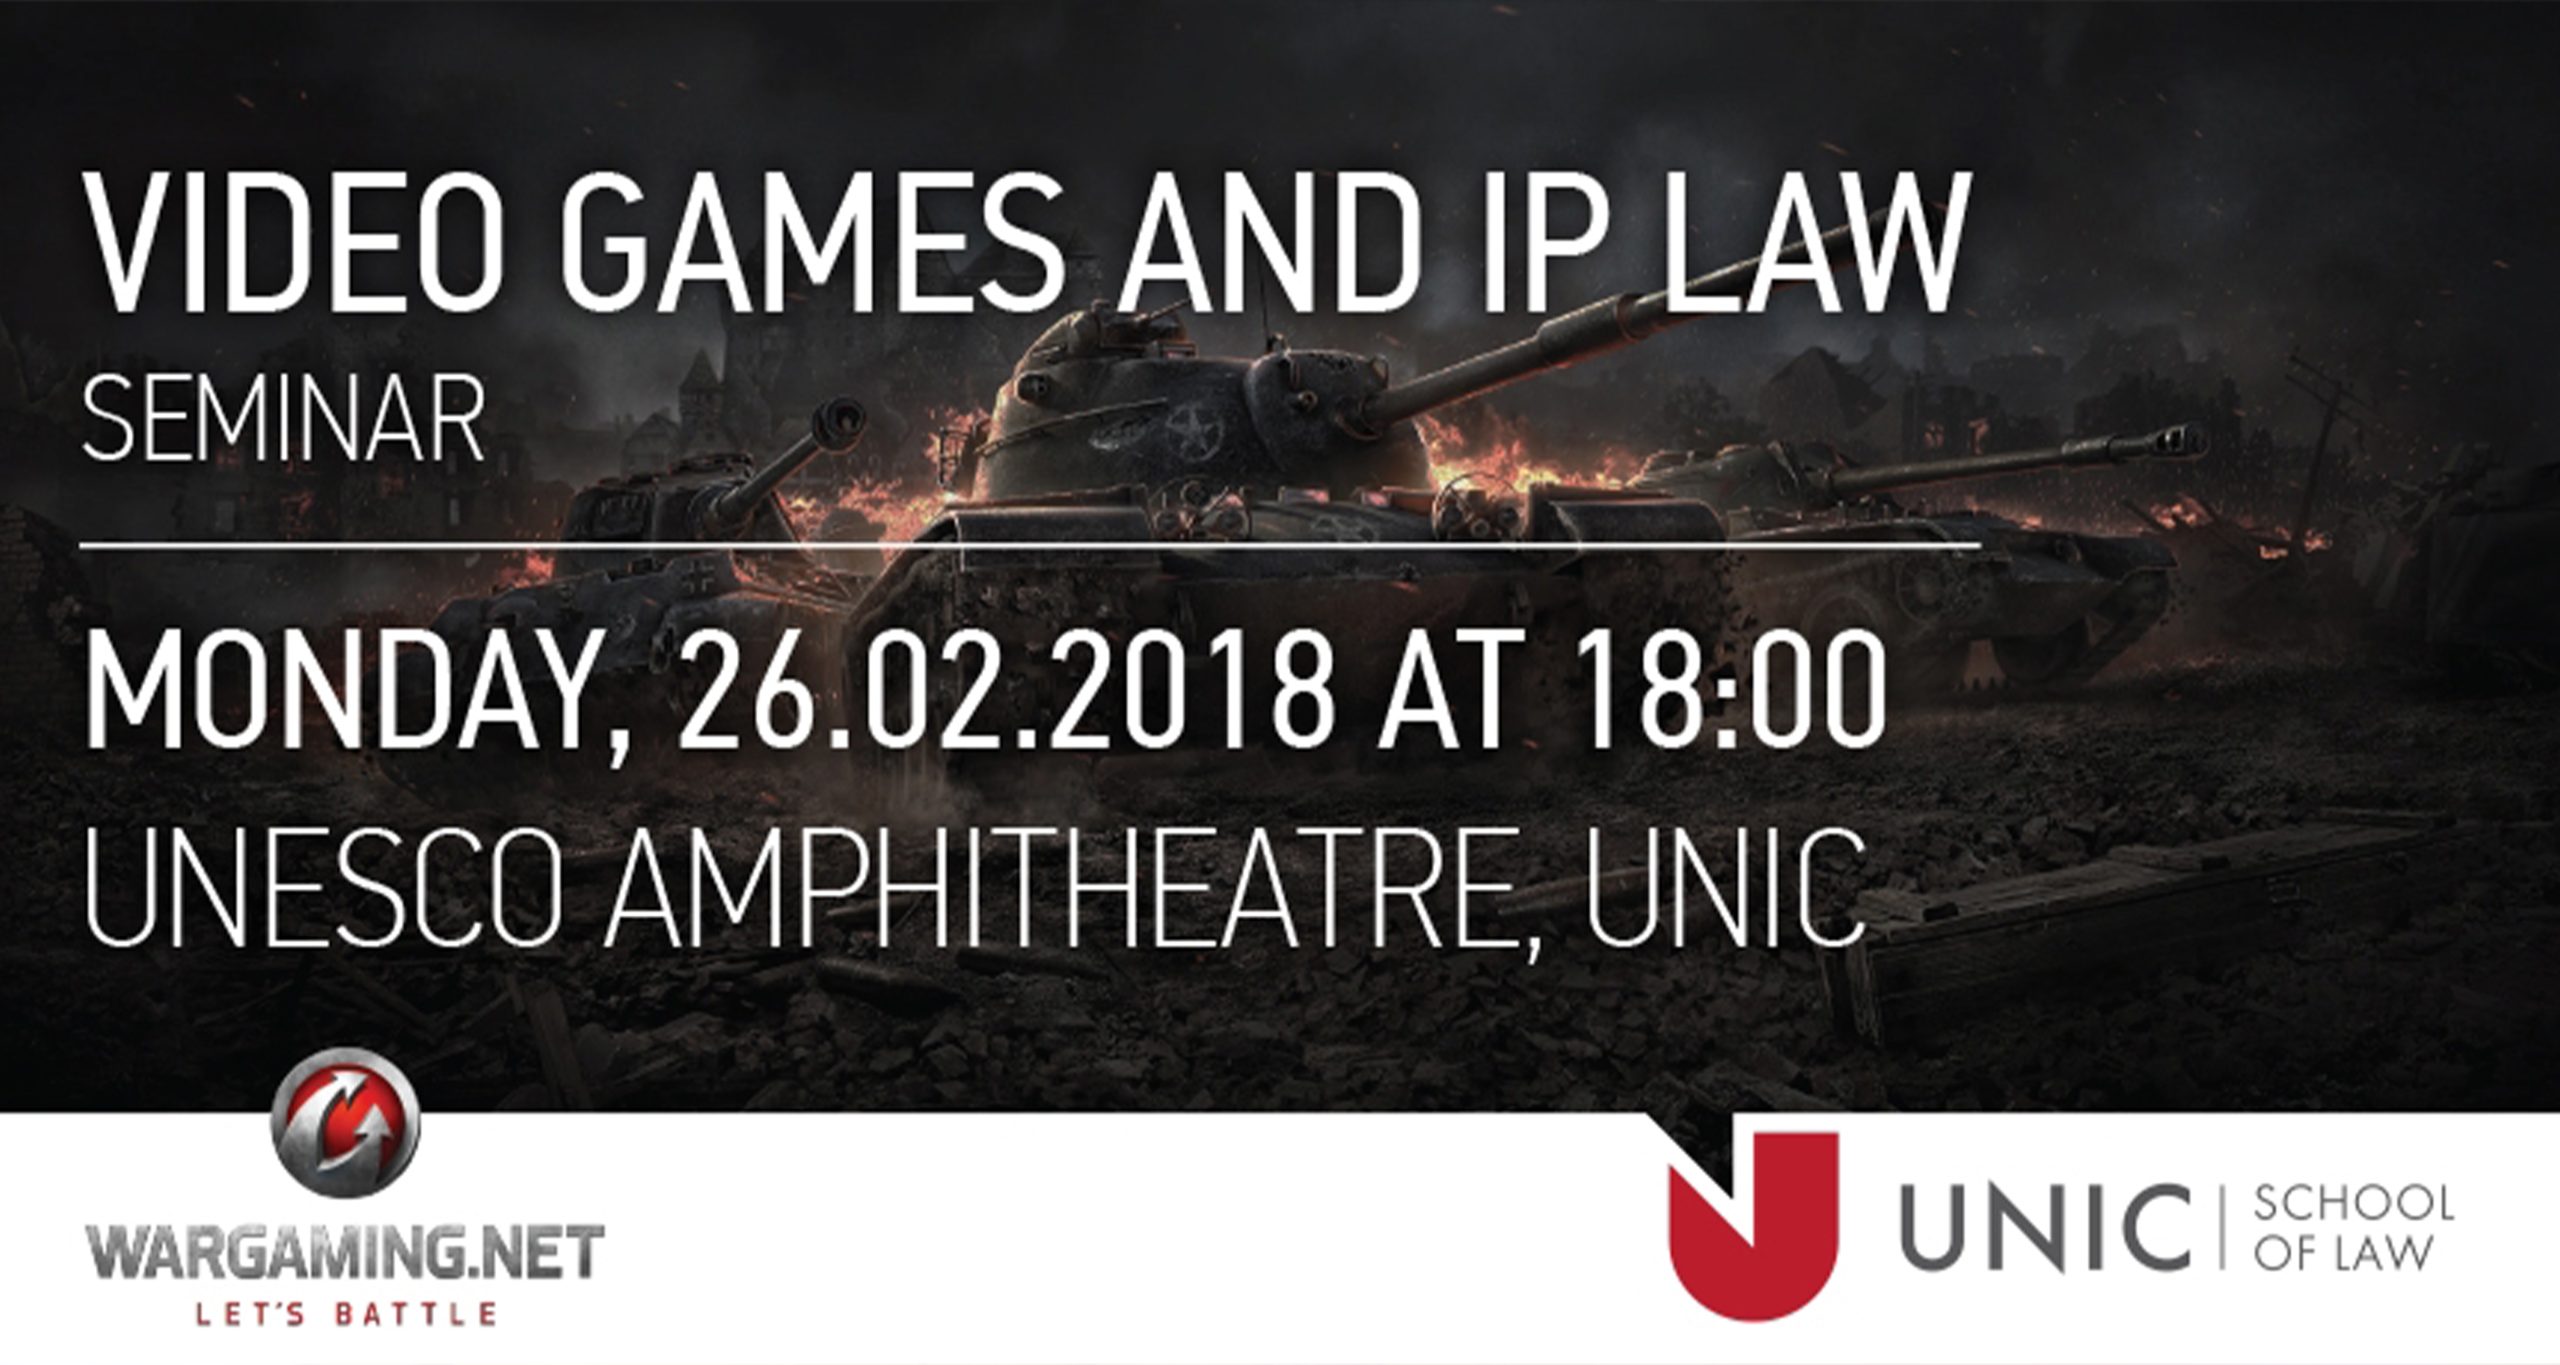 Video games and IP Law Seminar